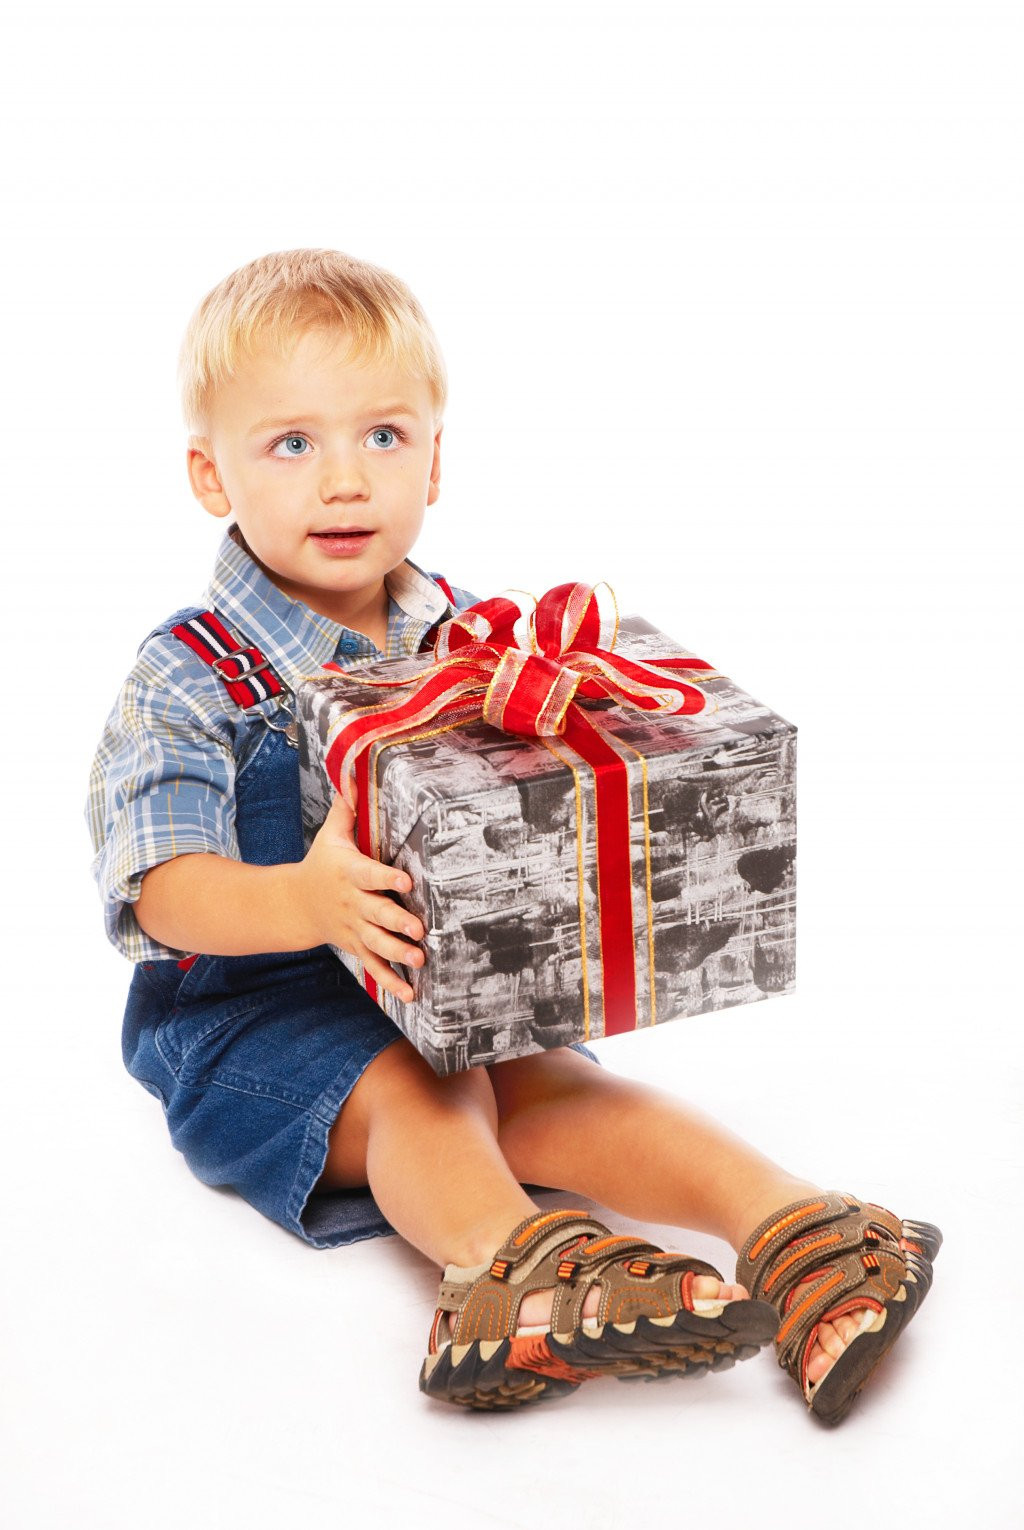 Birthday Gift Ideas 3 Year Old Boy
 Best Birthday and Christmas Gift Ideas for a Three Year